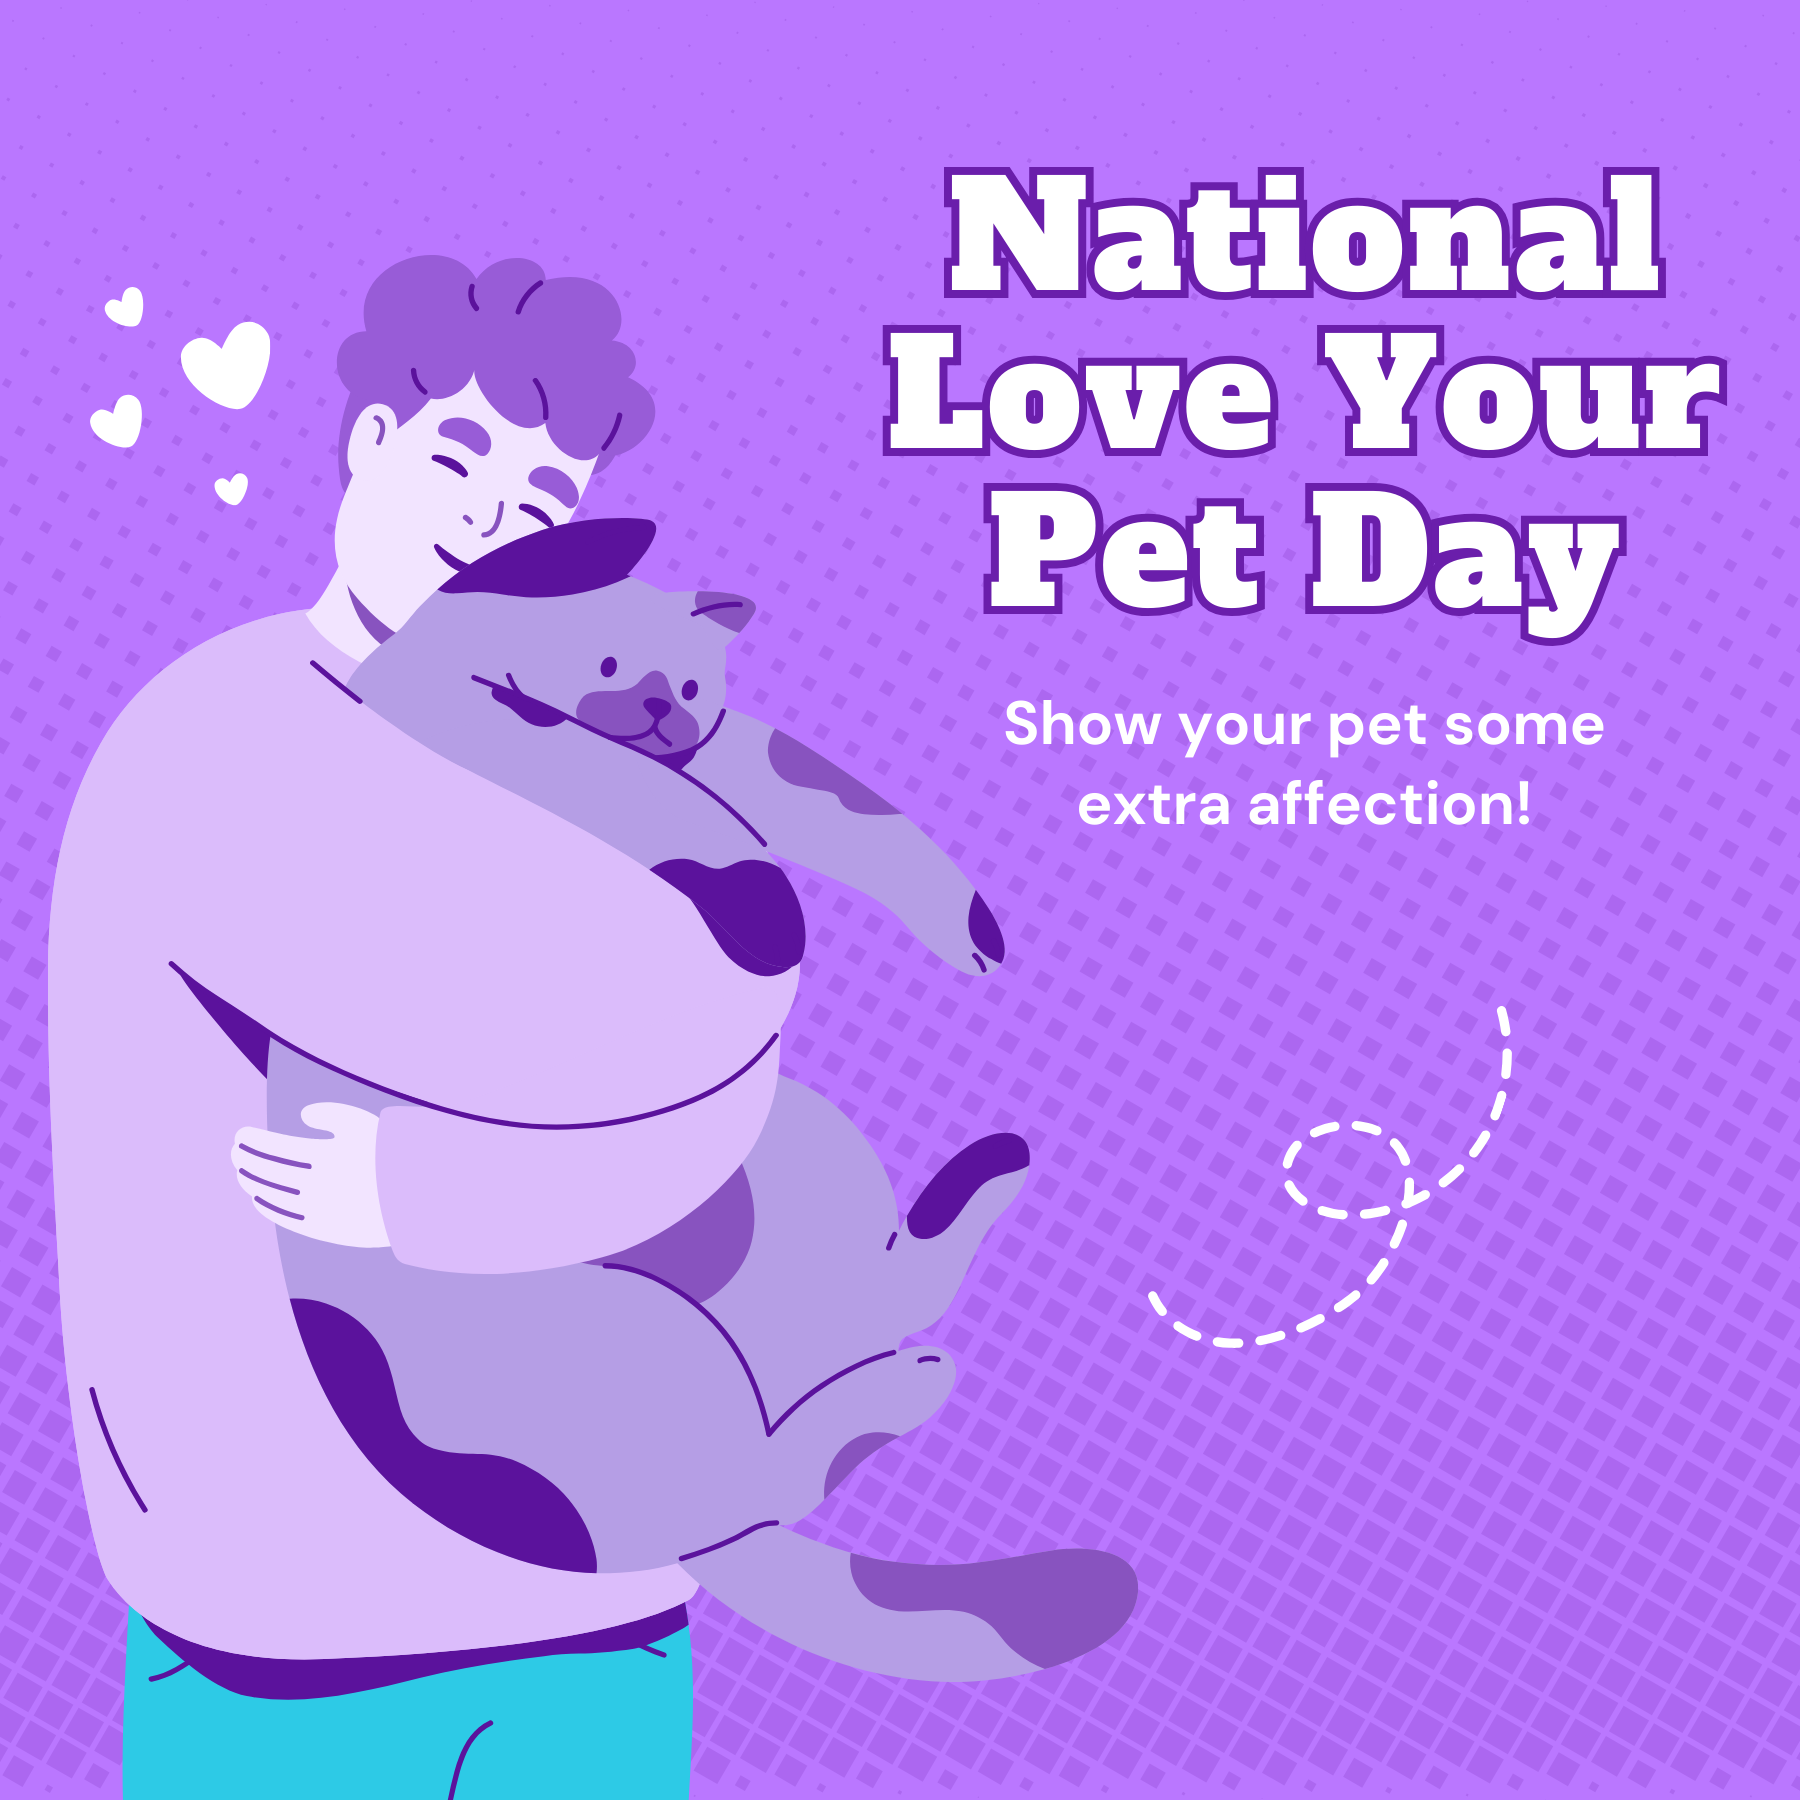 National Love Your Pet Day